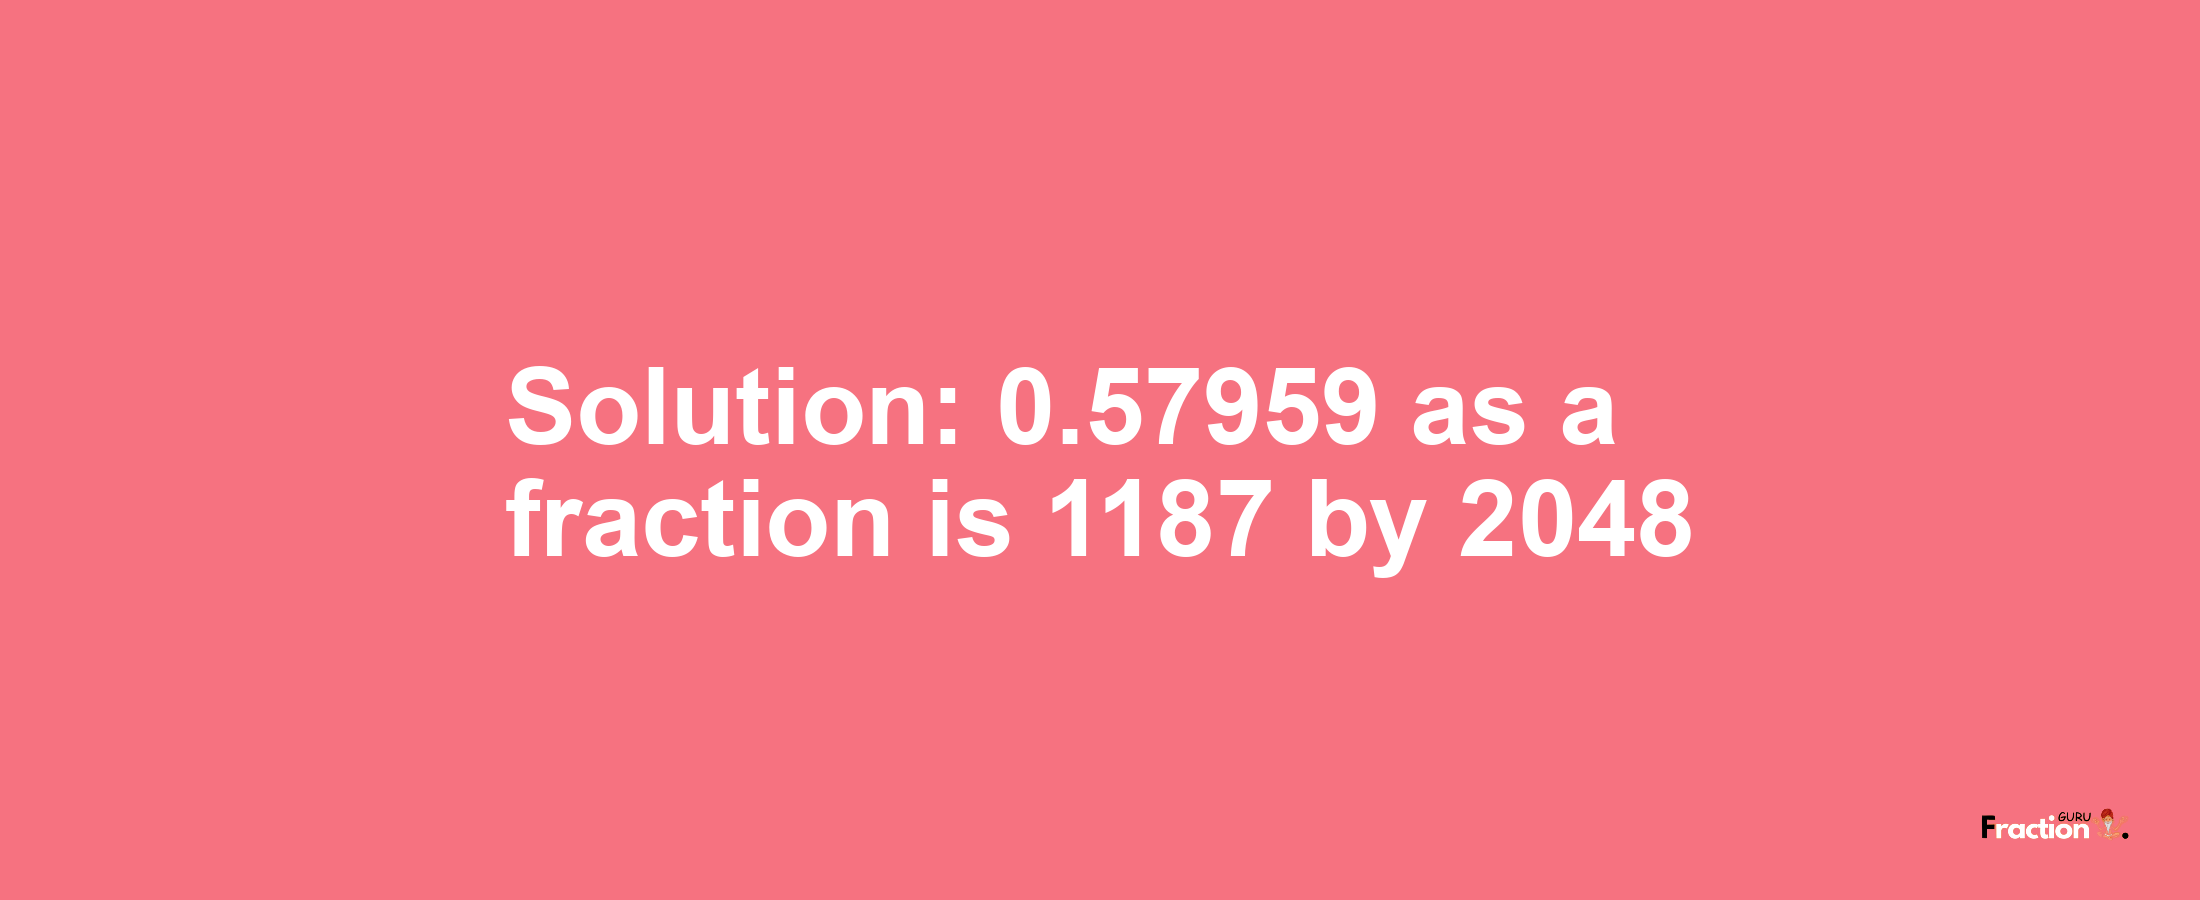 Solution:0.57959 as a fraction is 1187/2048